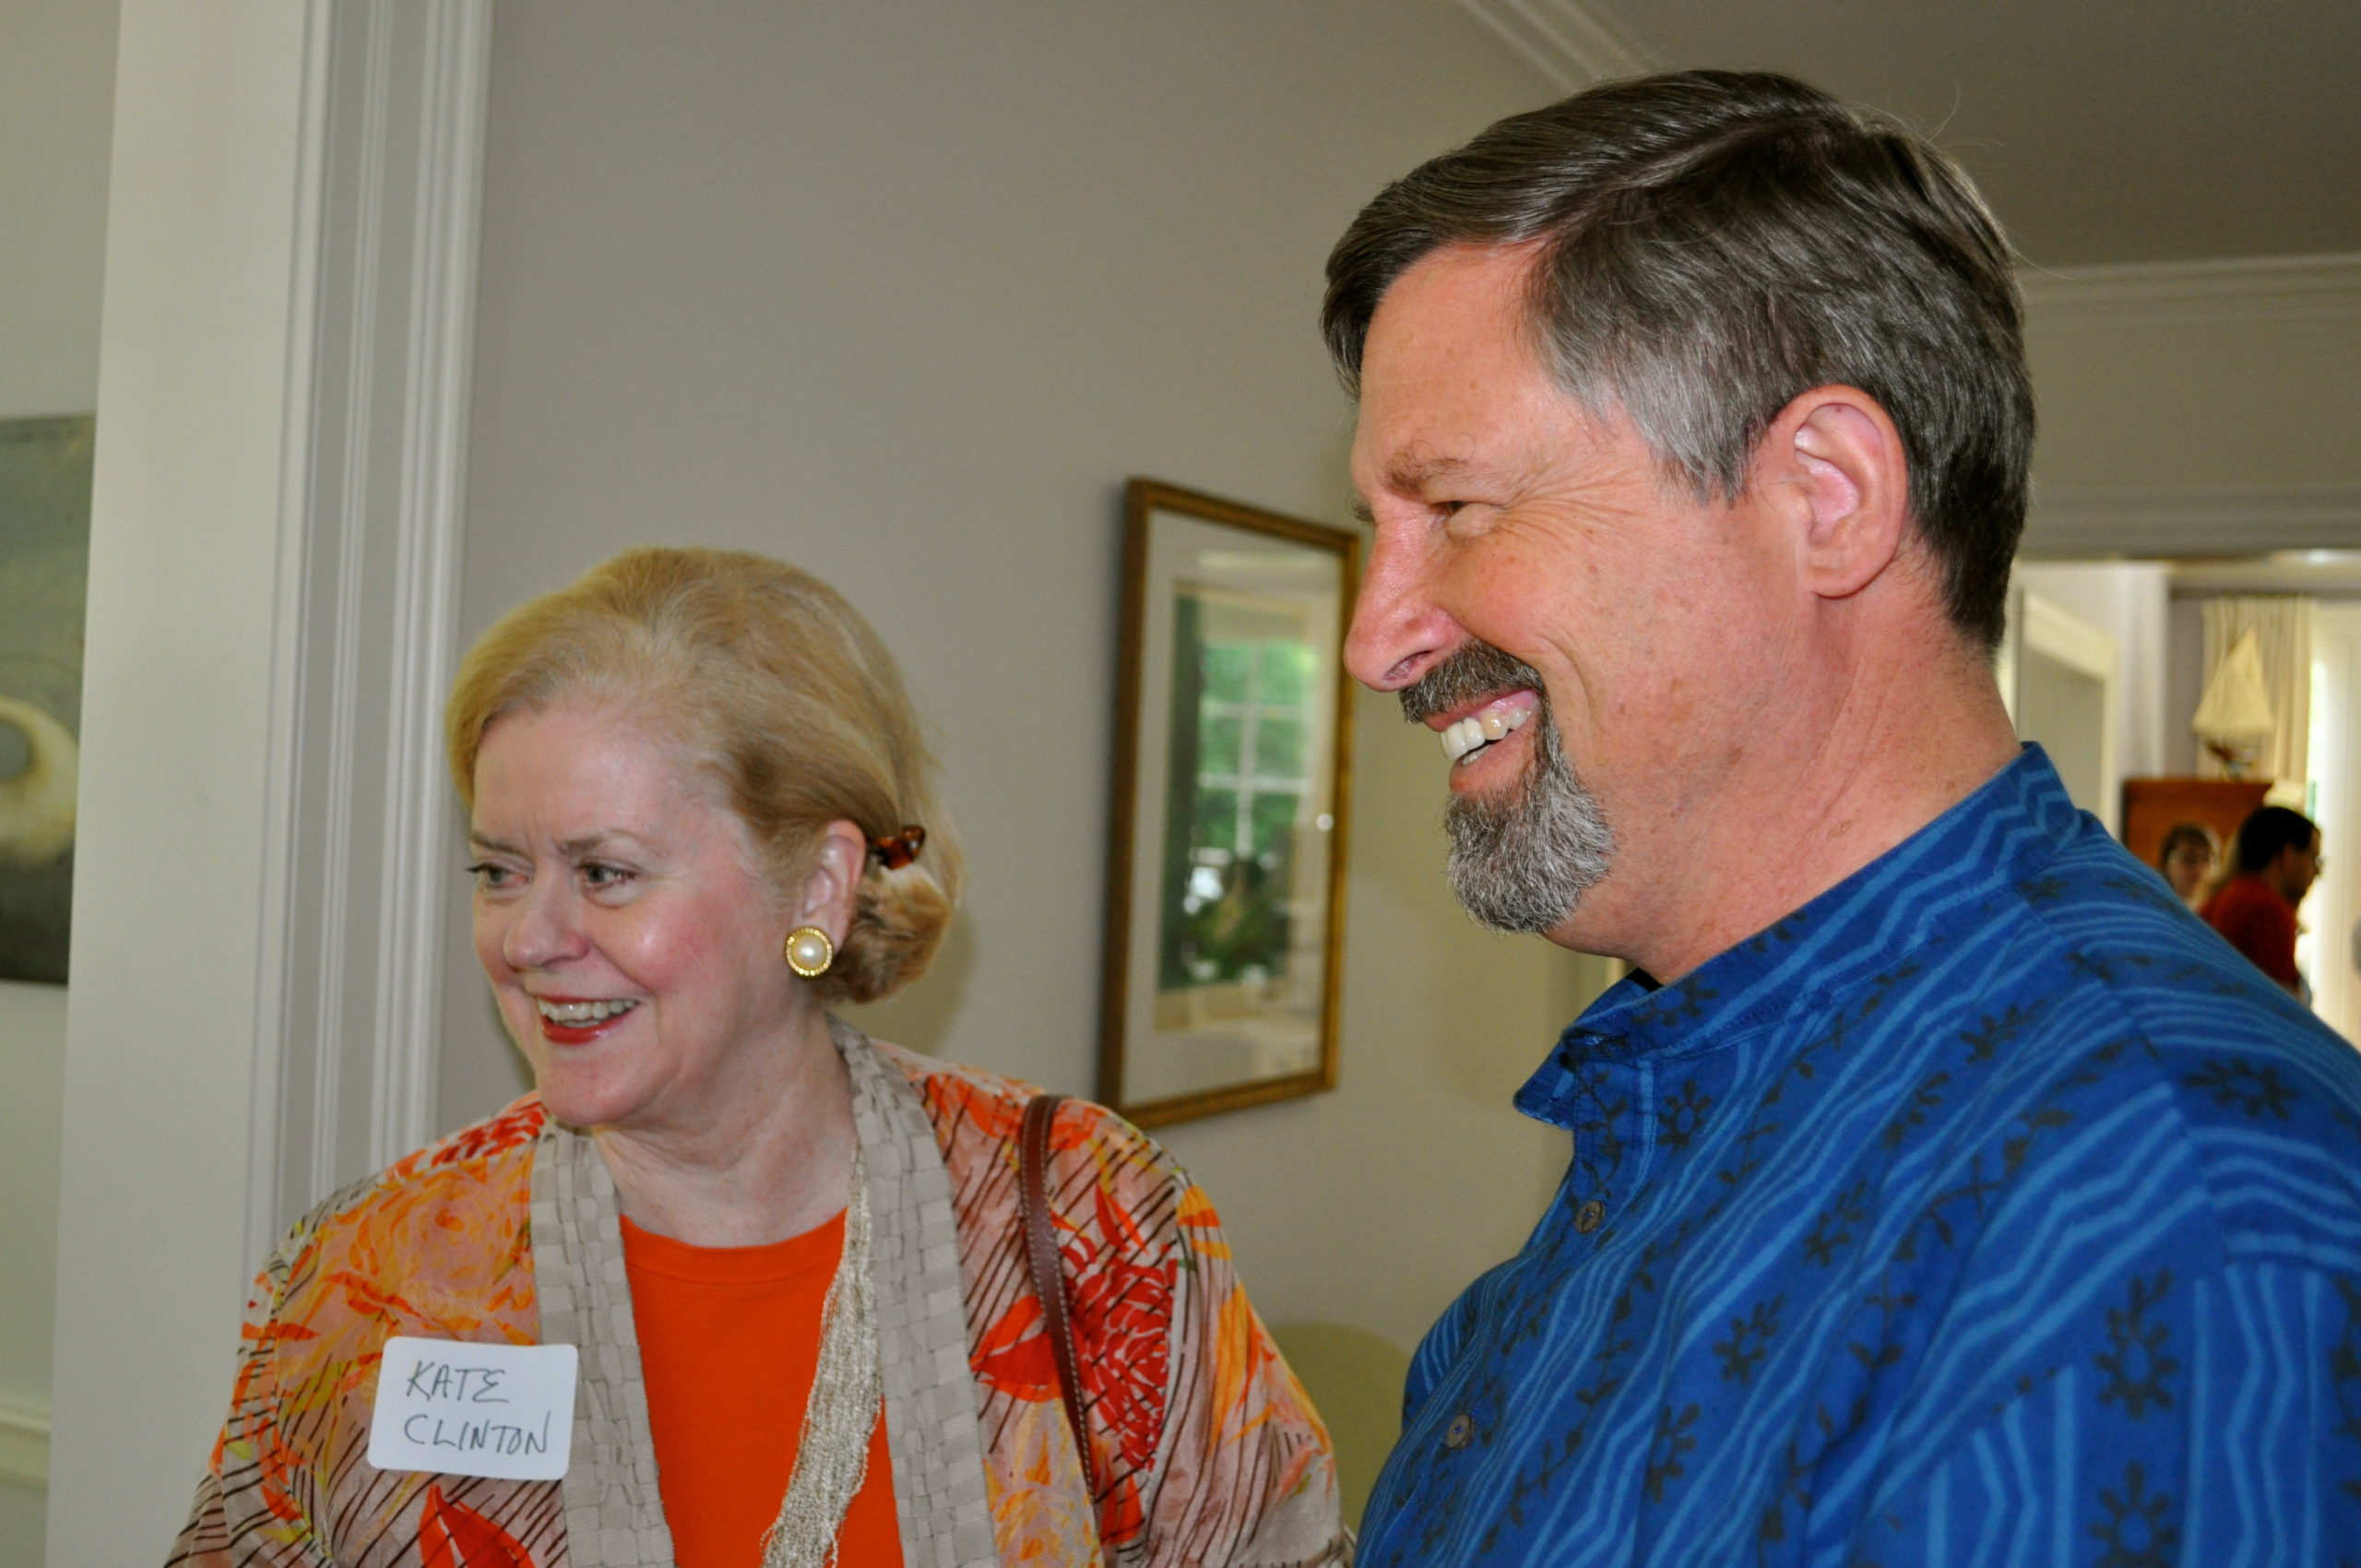 Kate Clinton and John Cook greet guests from L’Arche Philippines. The visitors stopped in Washington on their way to the L’Arche International Federation meeting in Atlanta last year. Photo by Elizabeth Black